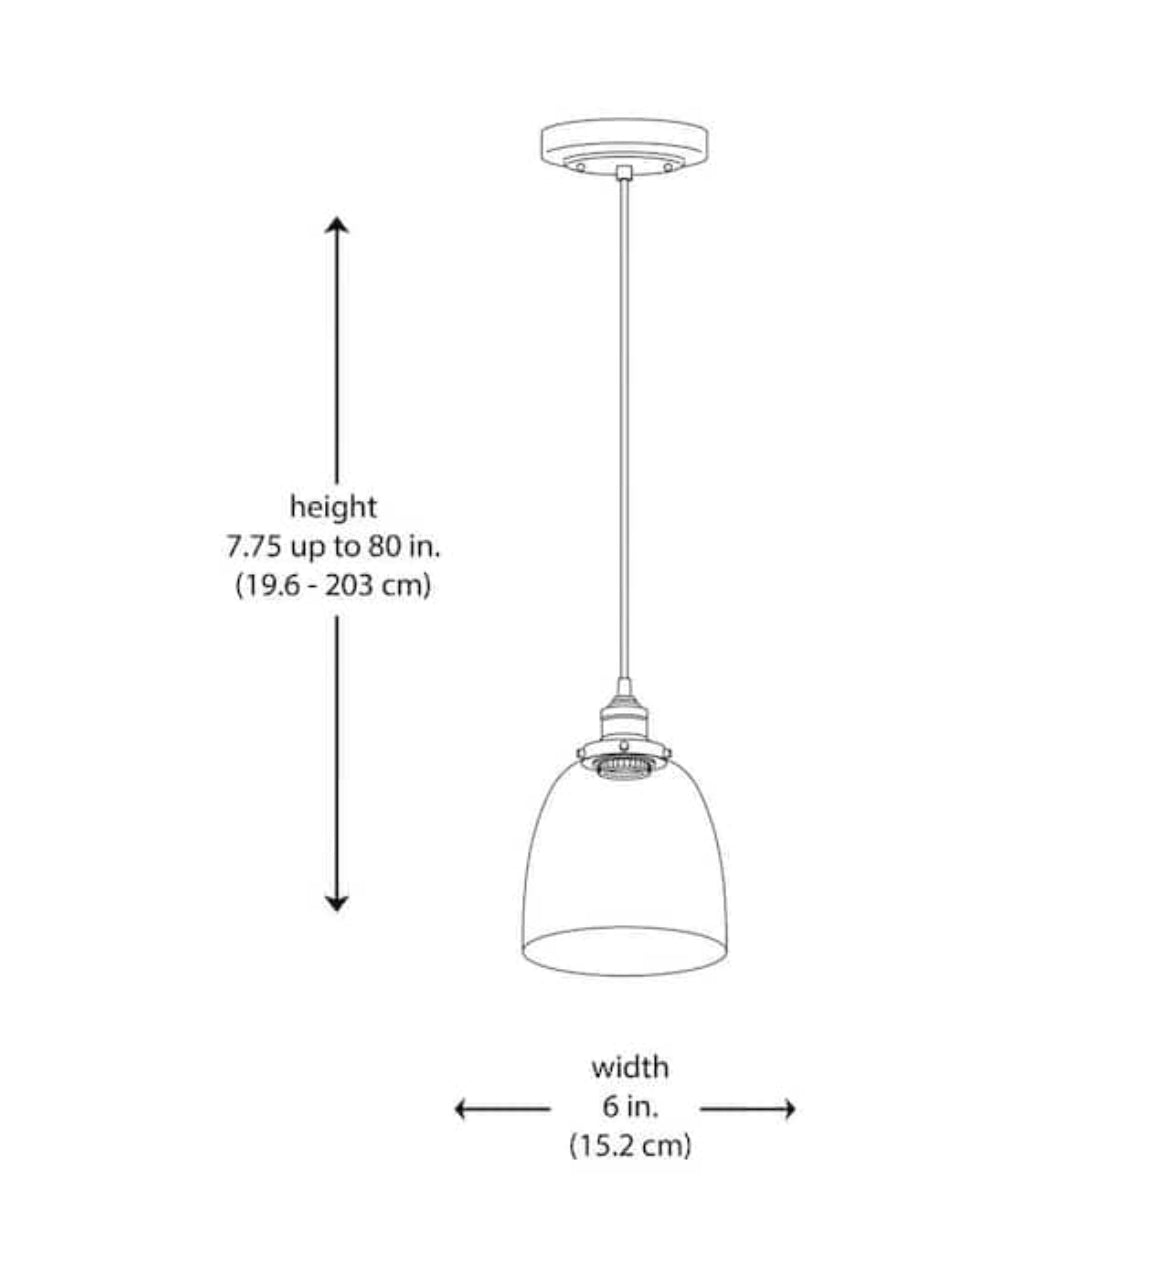 Monteaux Lighting 1-Light Oil Rubbed Bronze Hanging Kitchen Mini Pendant Light with Glass Shade